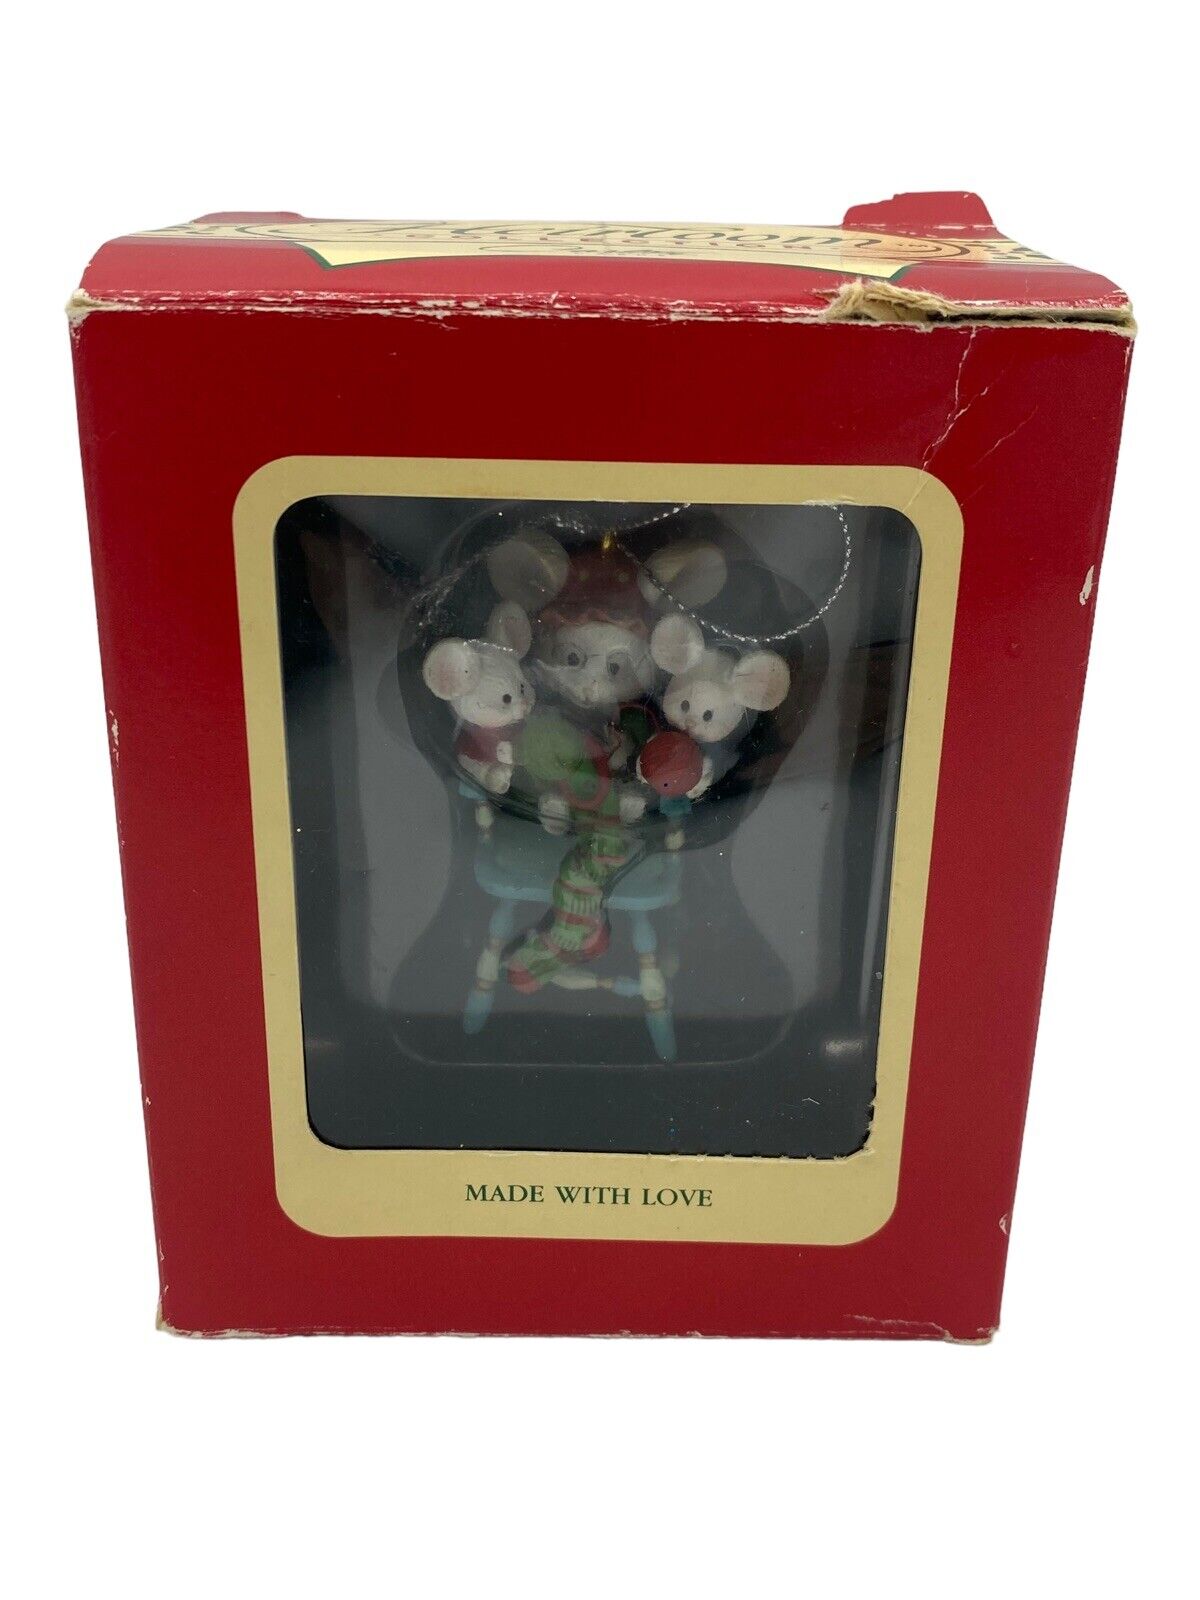 1992 Carlton Cards Heirloom Collection Ornament - Made With Love